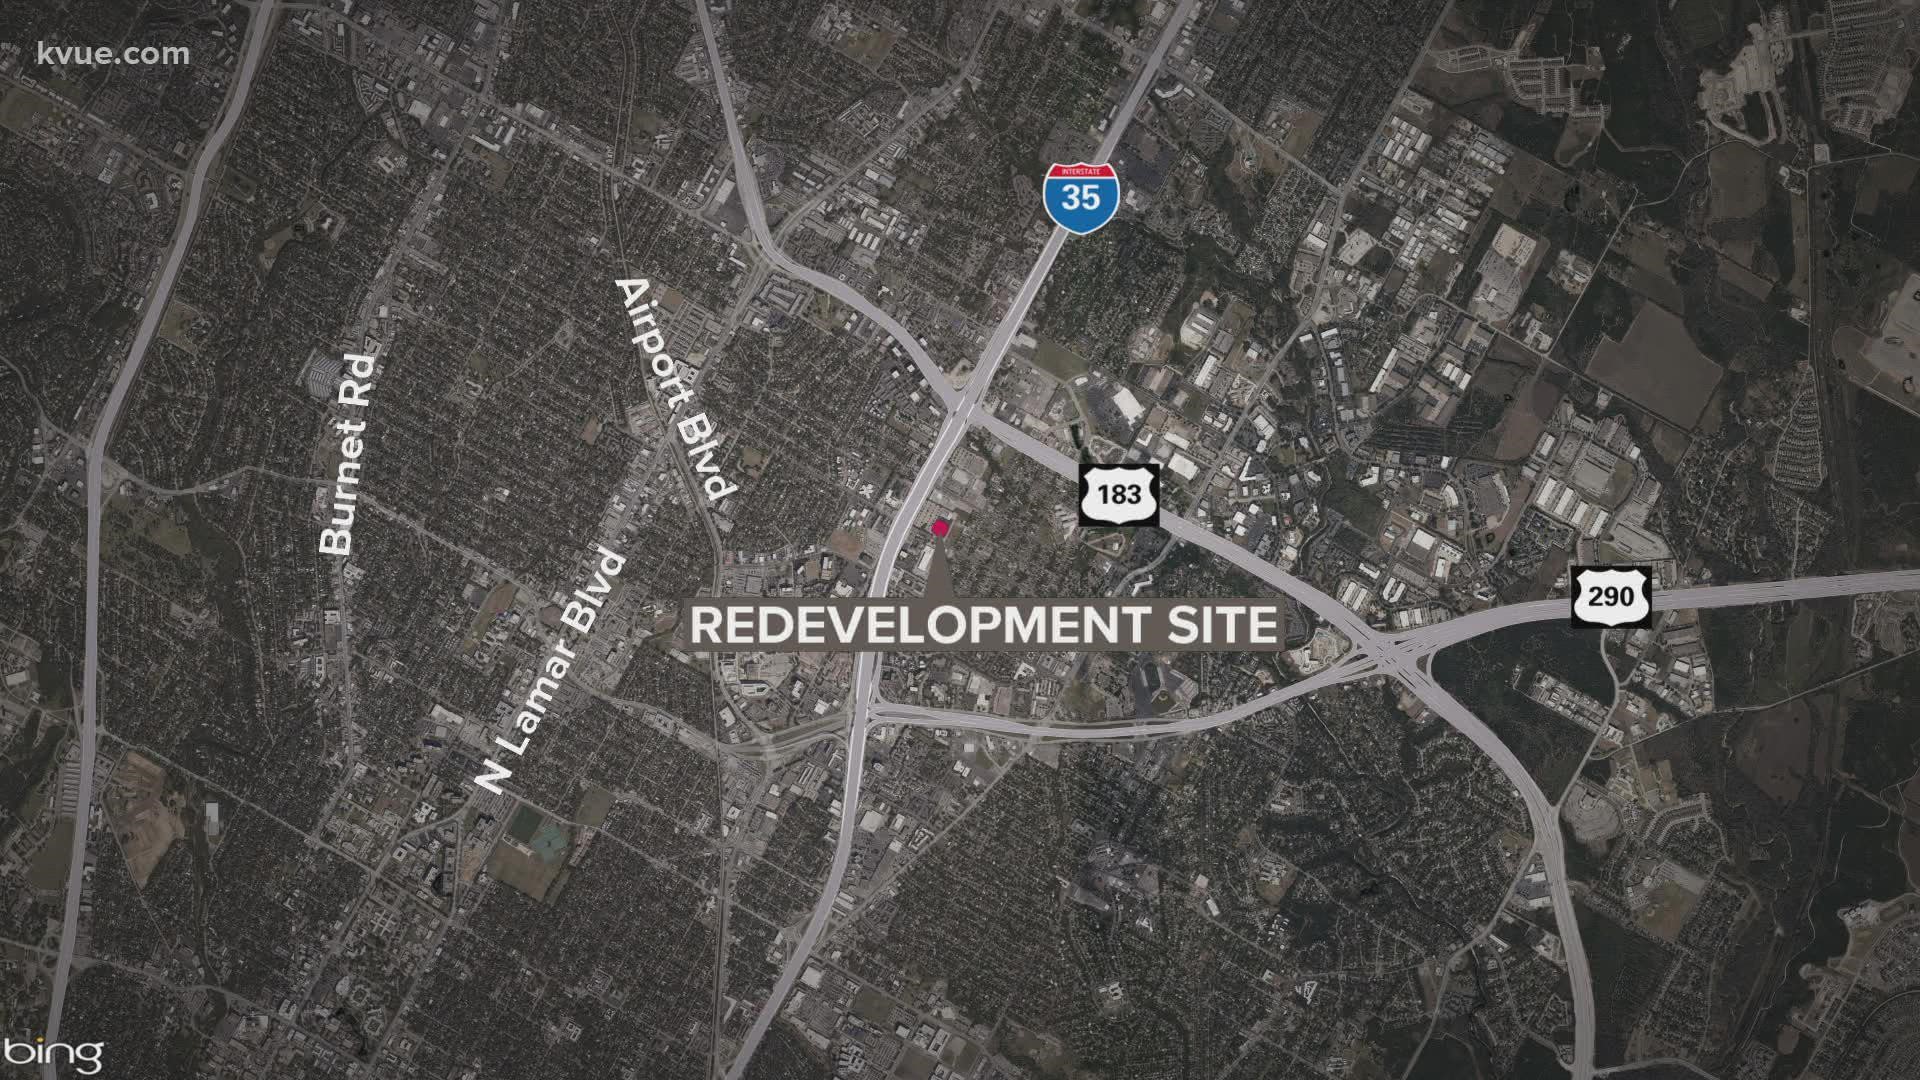 The city council voted on an agreement with the developer Greystar for the St. Johns project near Interstate 35 and U.S. 183.